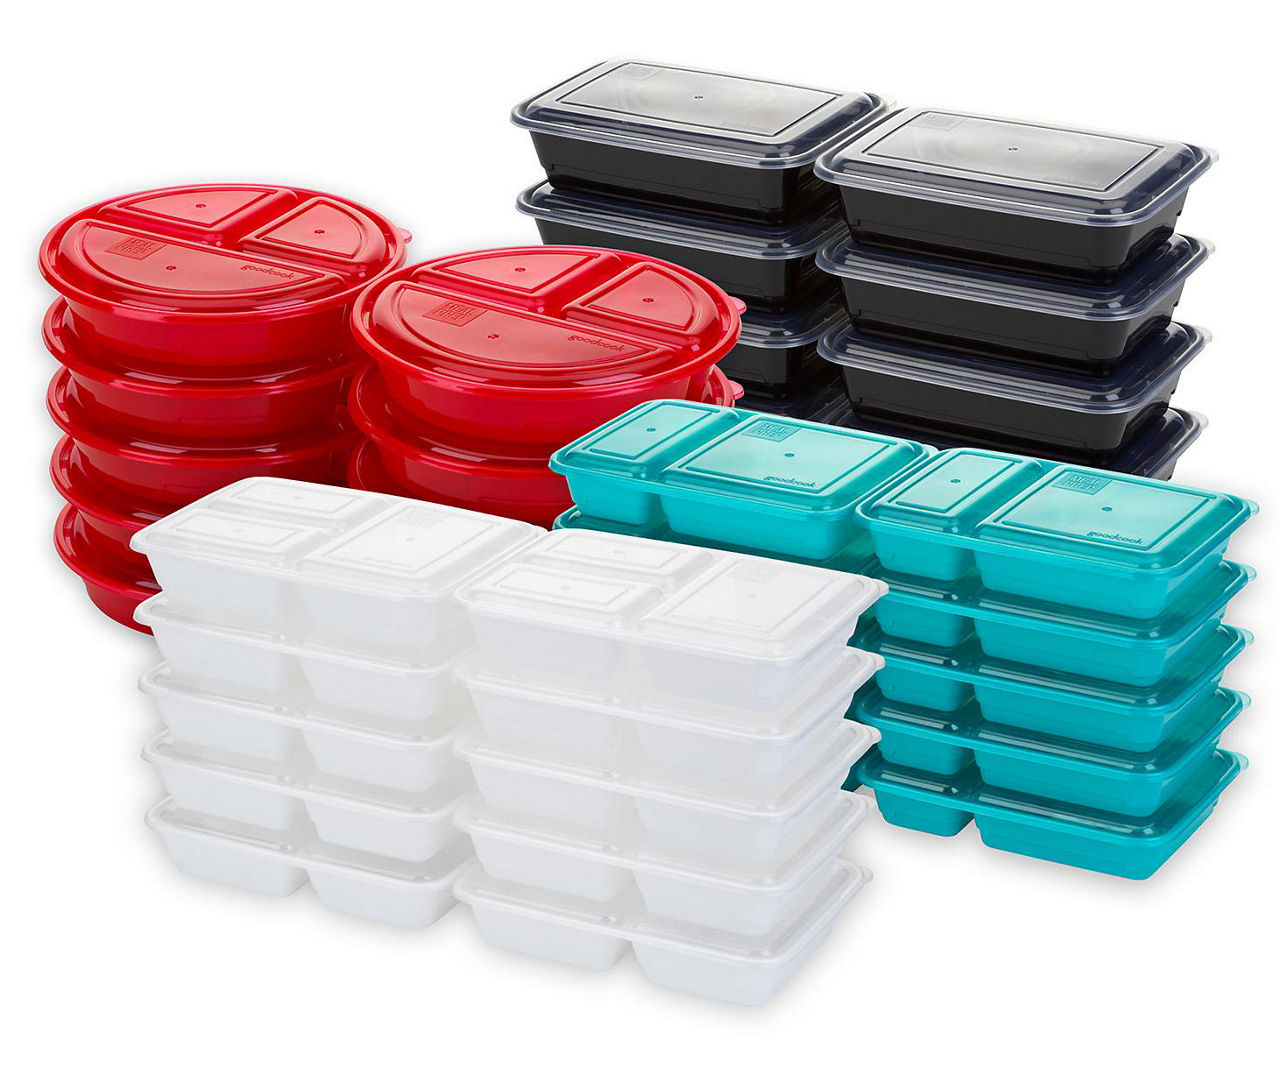 Goodcook 3 Compartment Meal Prep Container, Rectangle